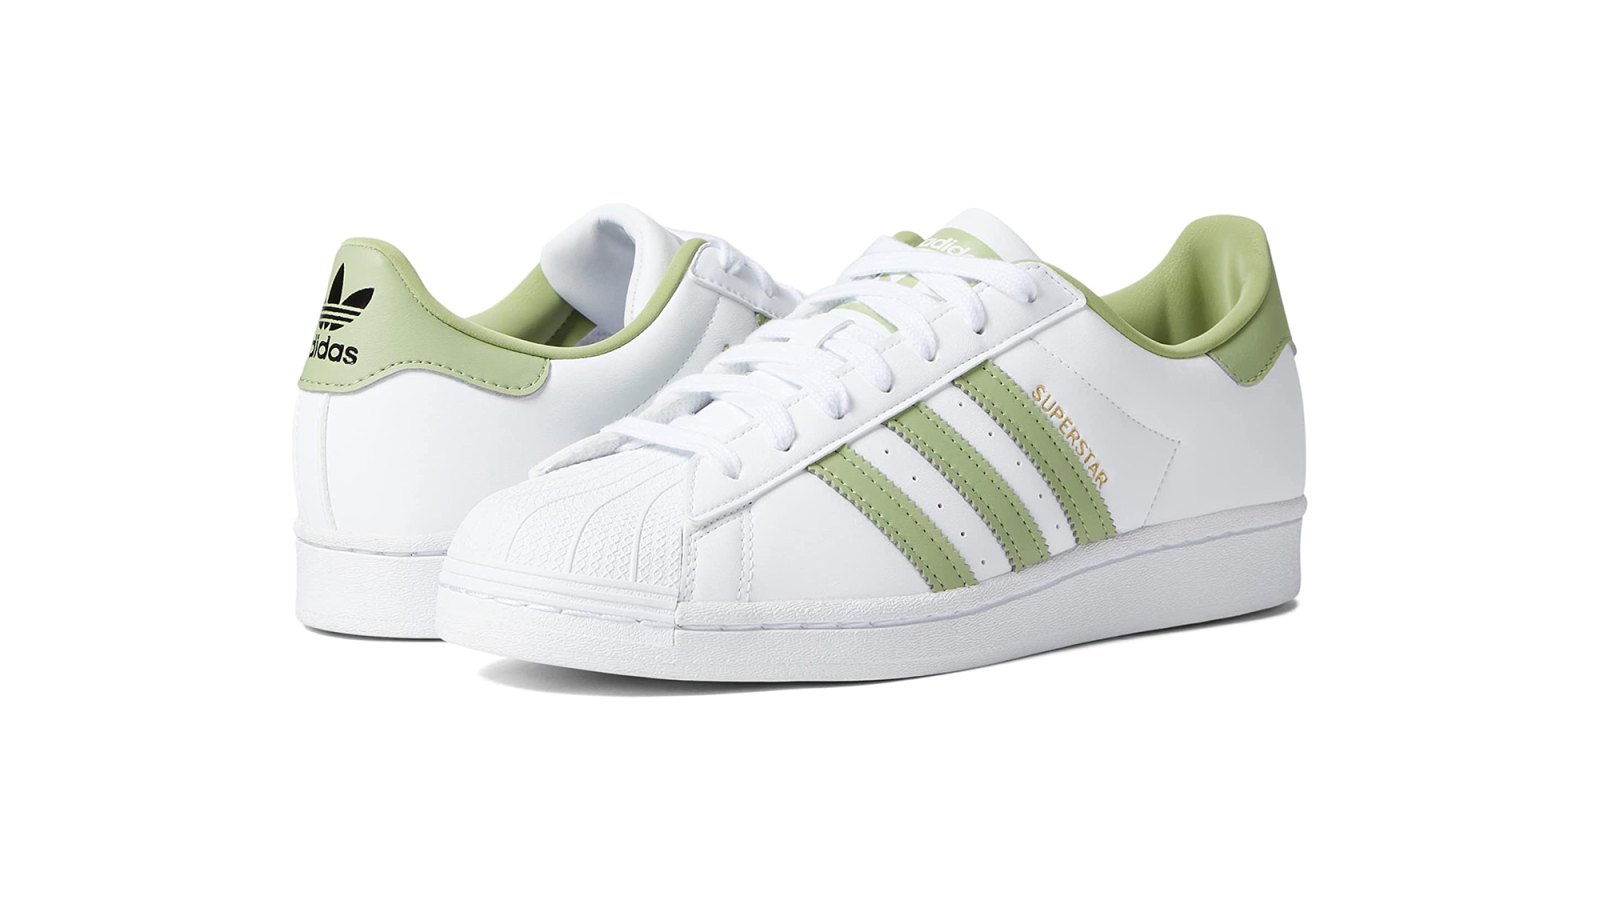 Classic Sneakers Have a Pop Color That's Ideal for Spring